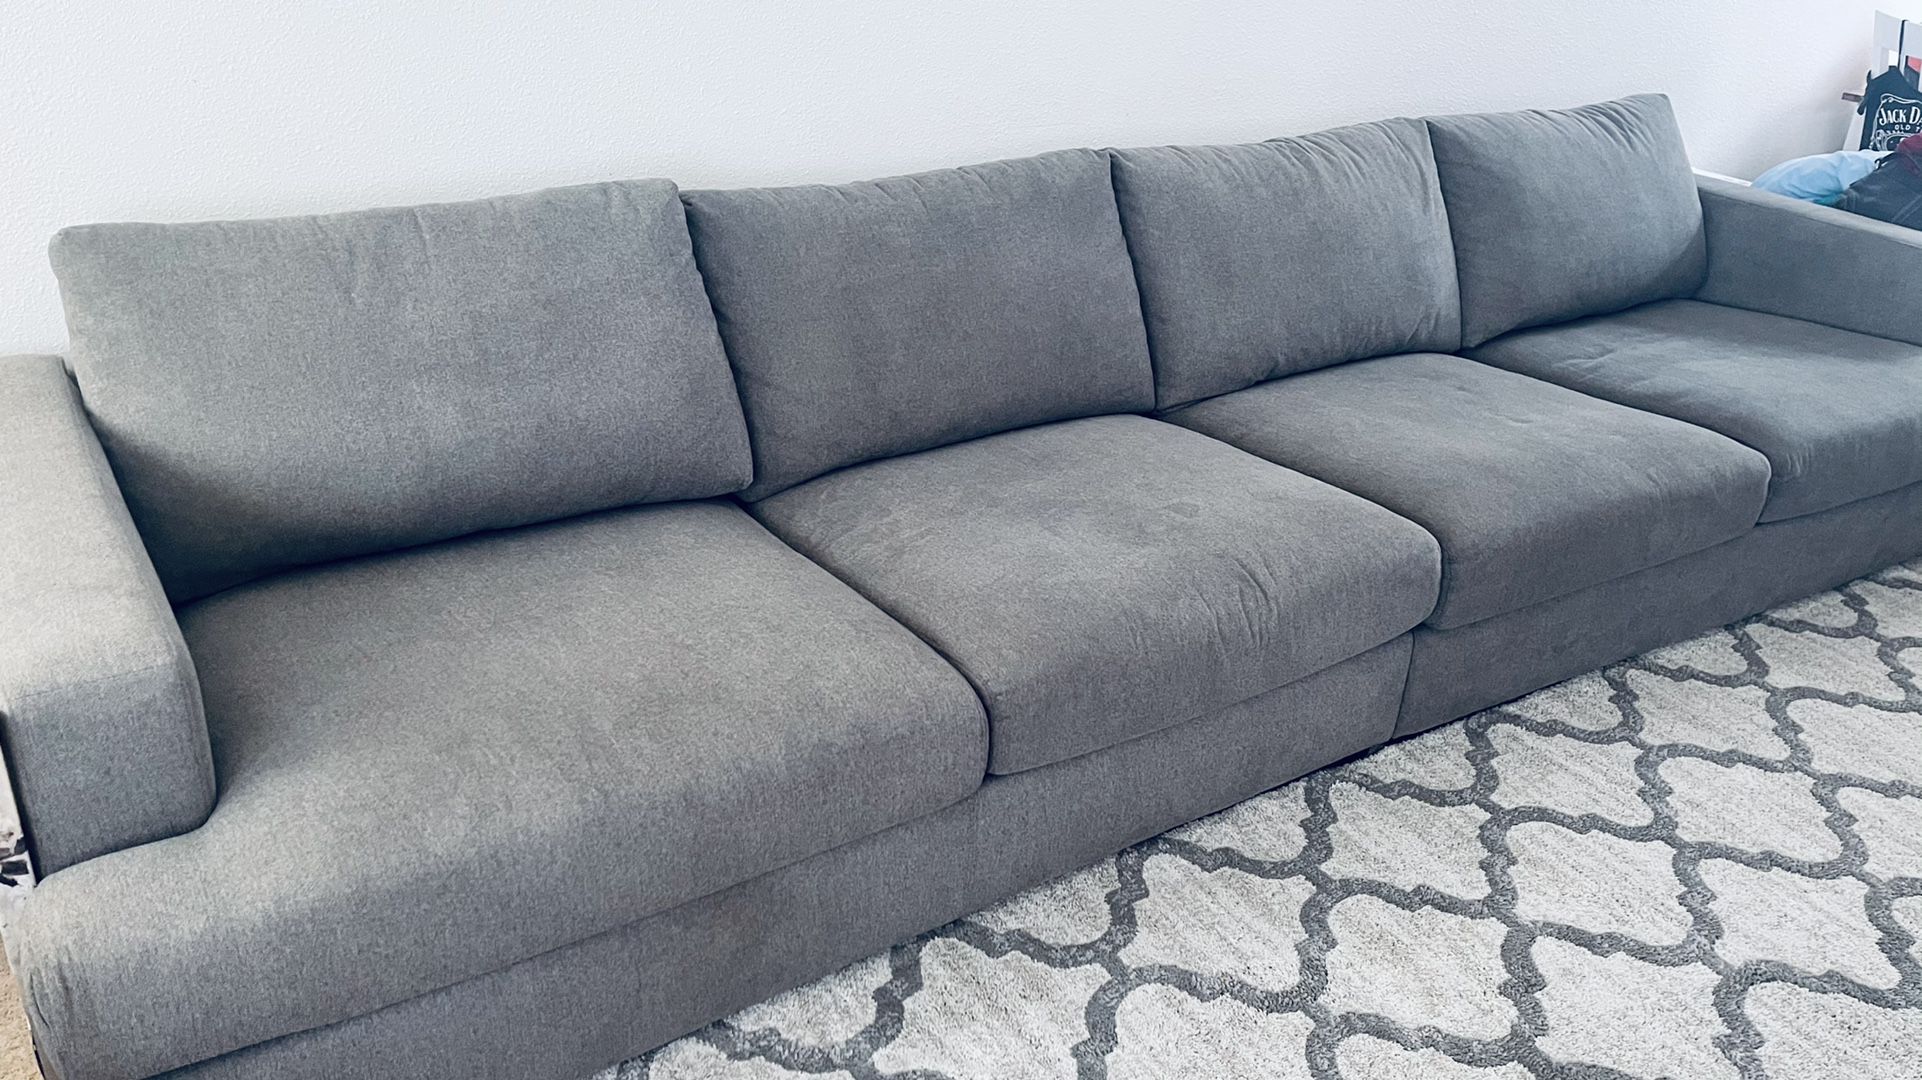 Large Grey Modular  Couch 6 Months Old